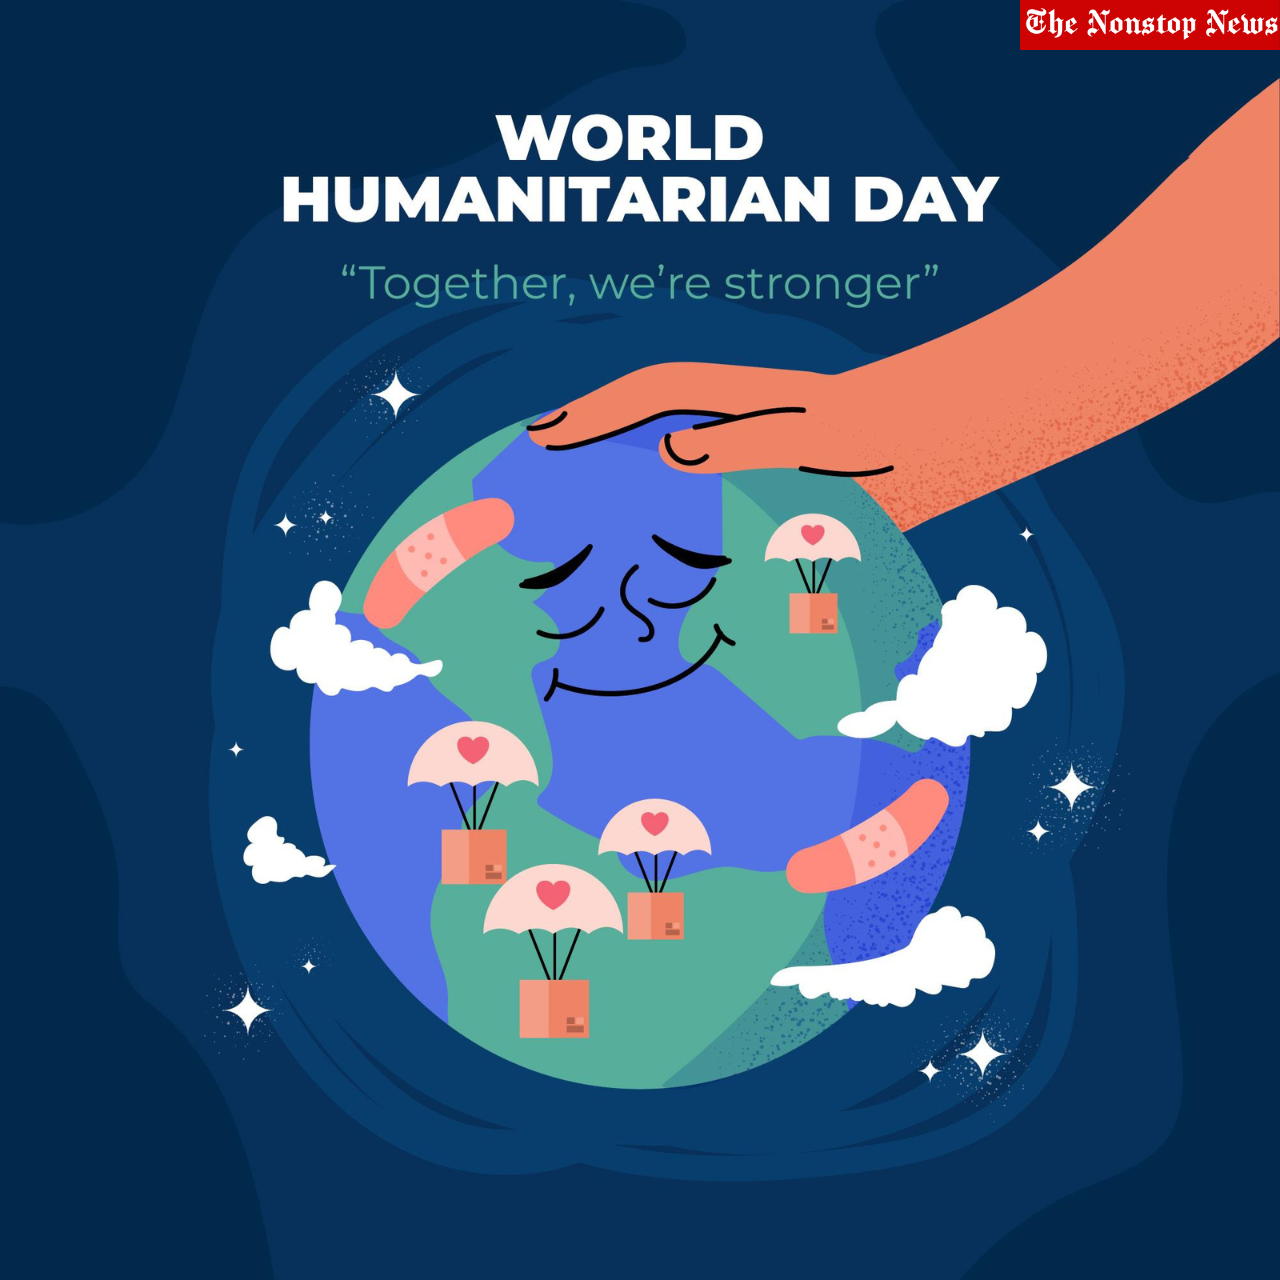 World Humanitarian Day 2022: Quotes, Posters, Messages, Greetings, Stories, Images to share